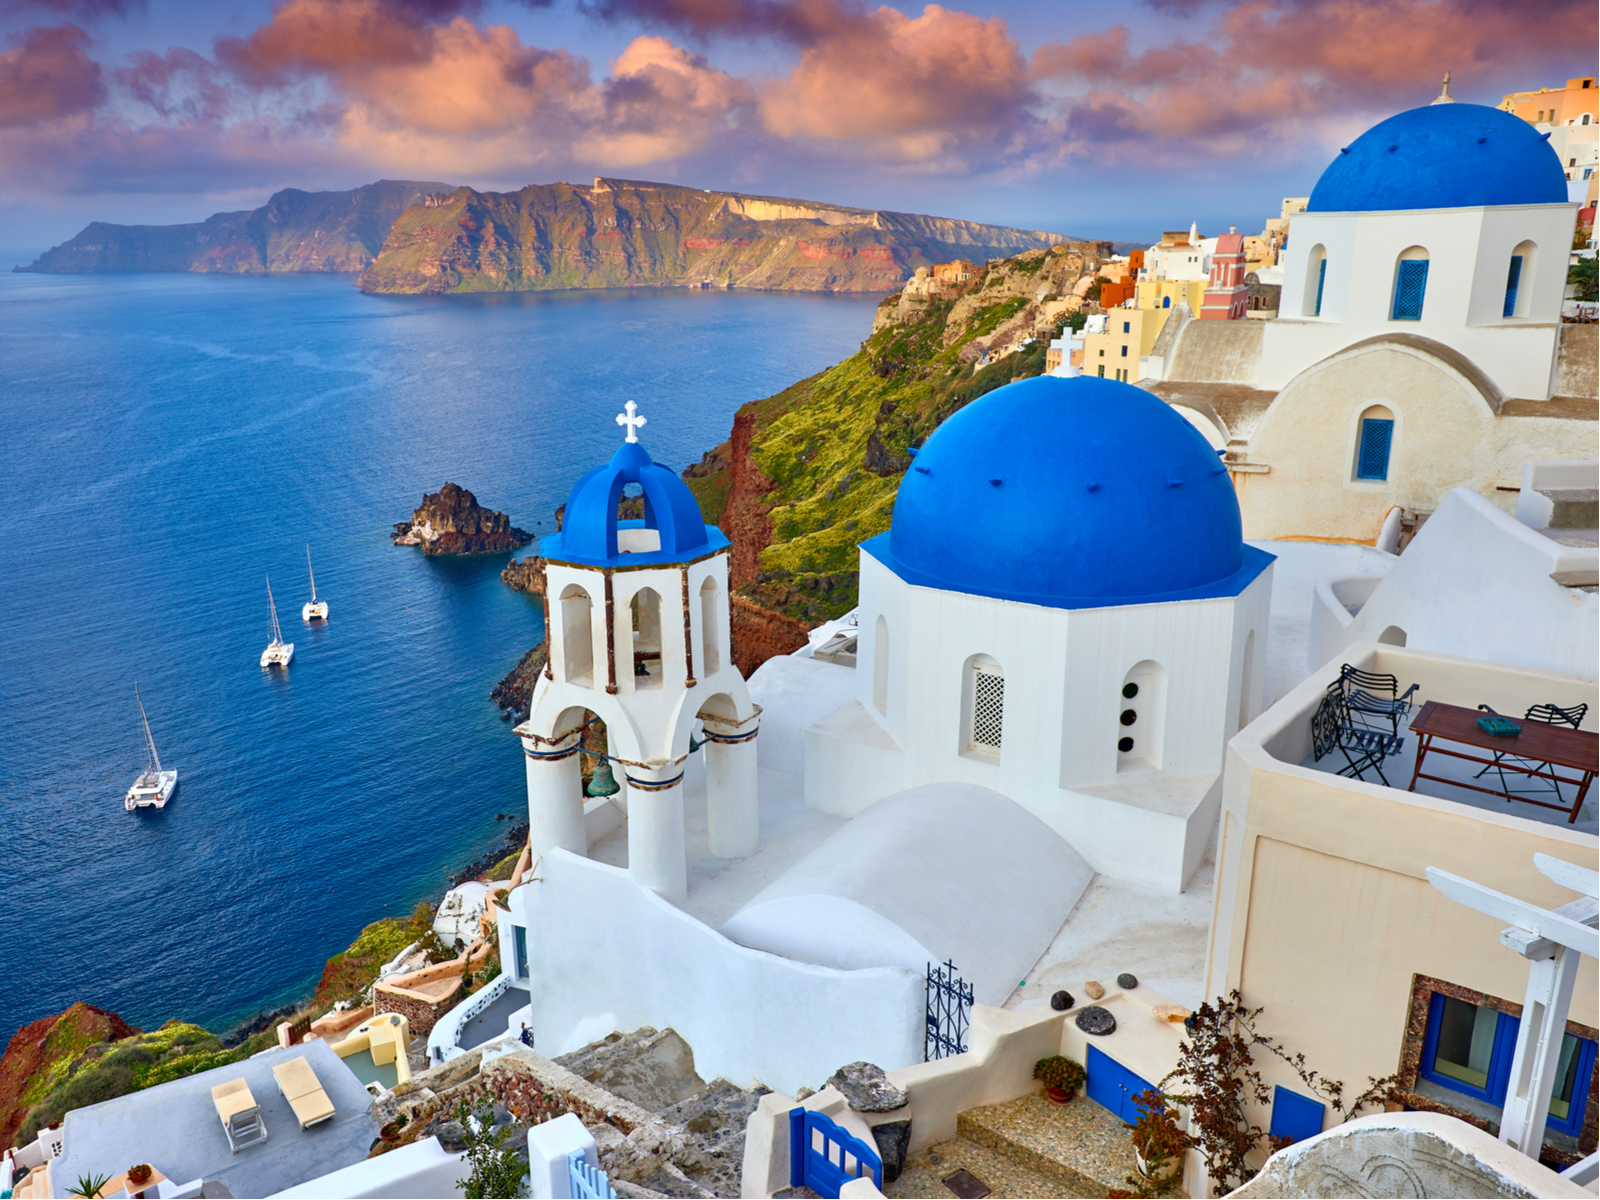 Santorini, one of the best island vacations, pictured from the top of the hill